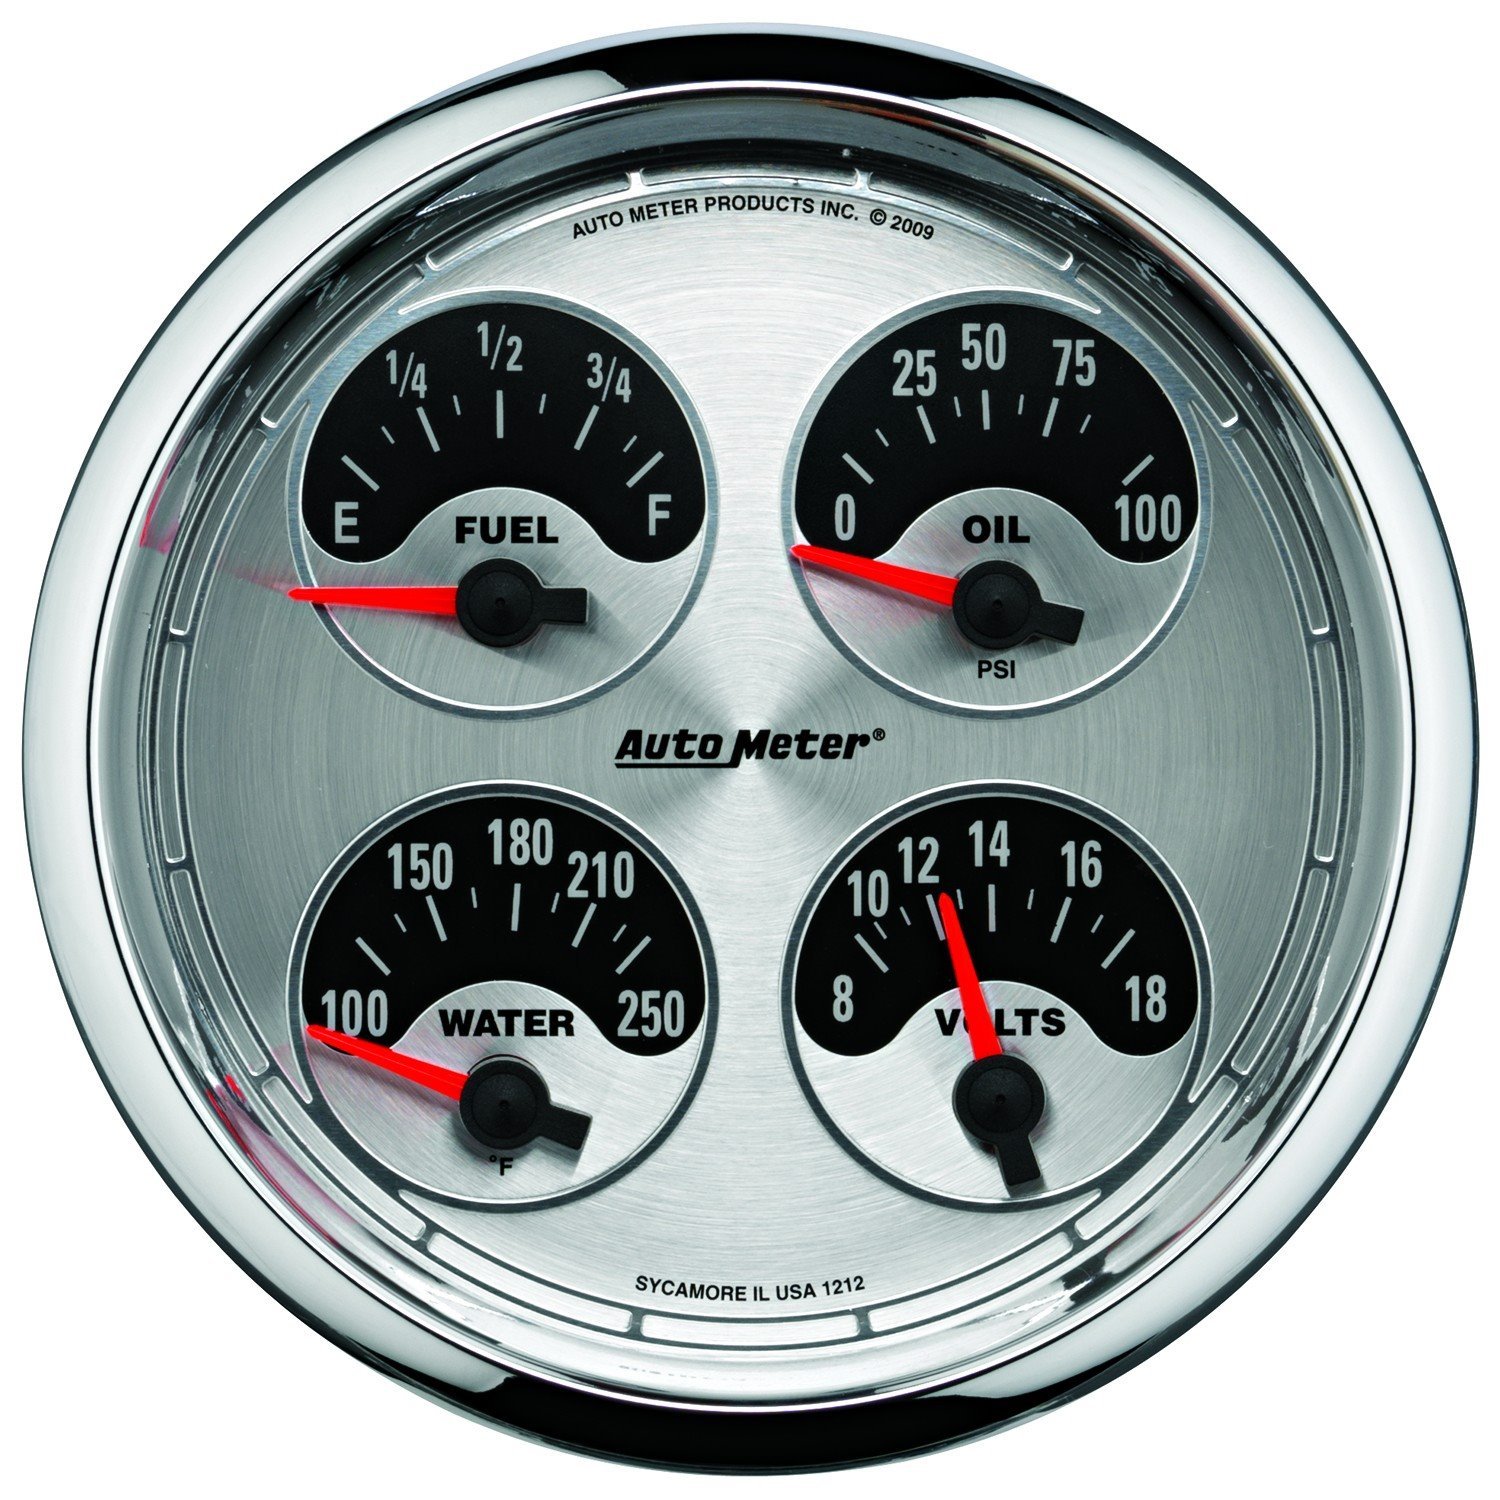 American Muscle Quad Gauge 5" Electrical